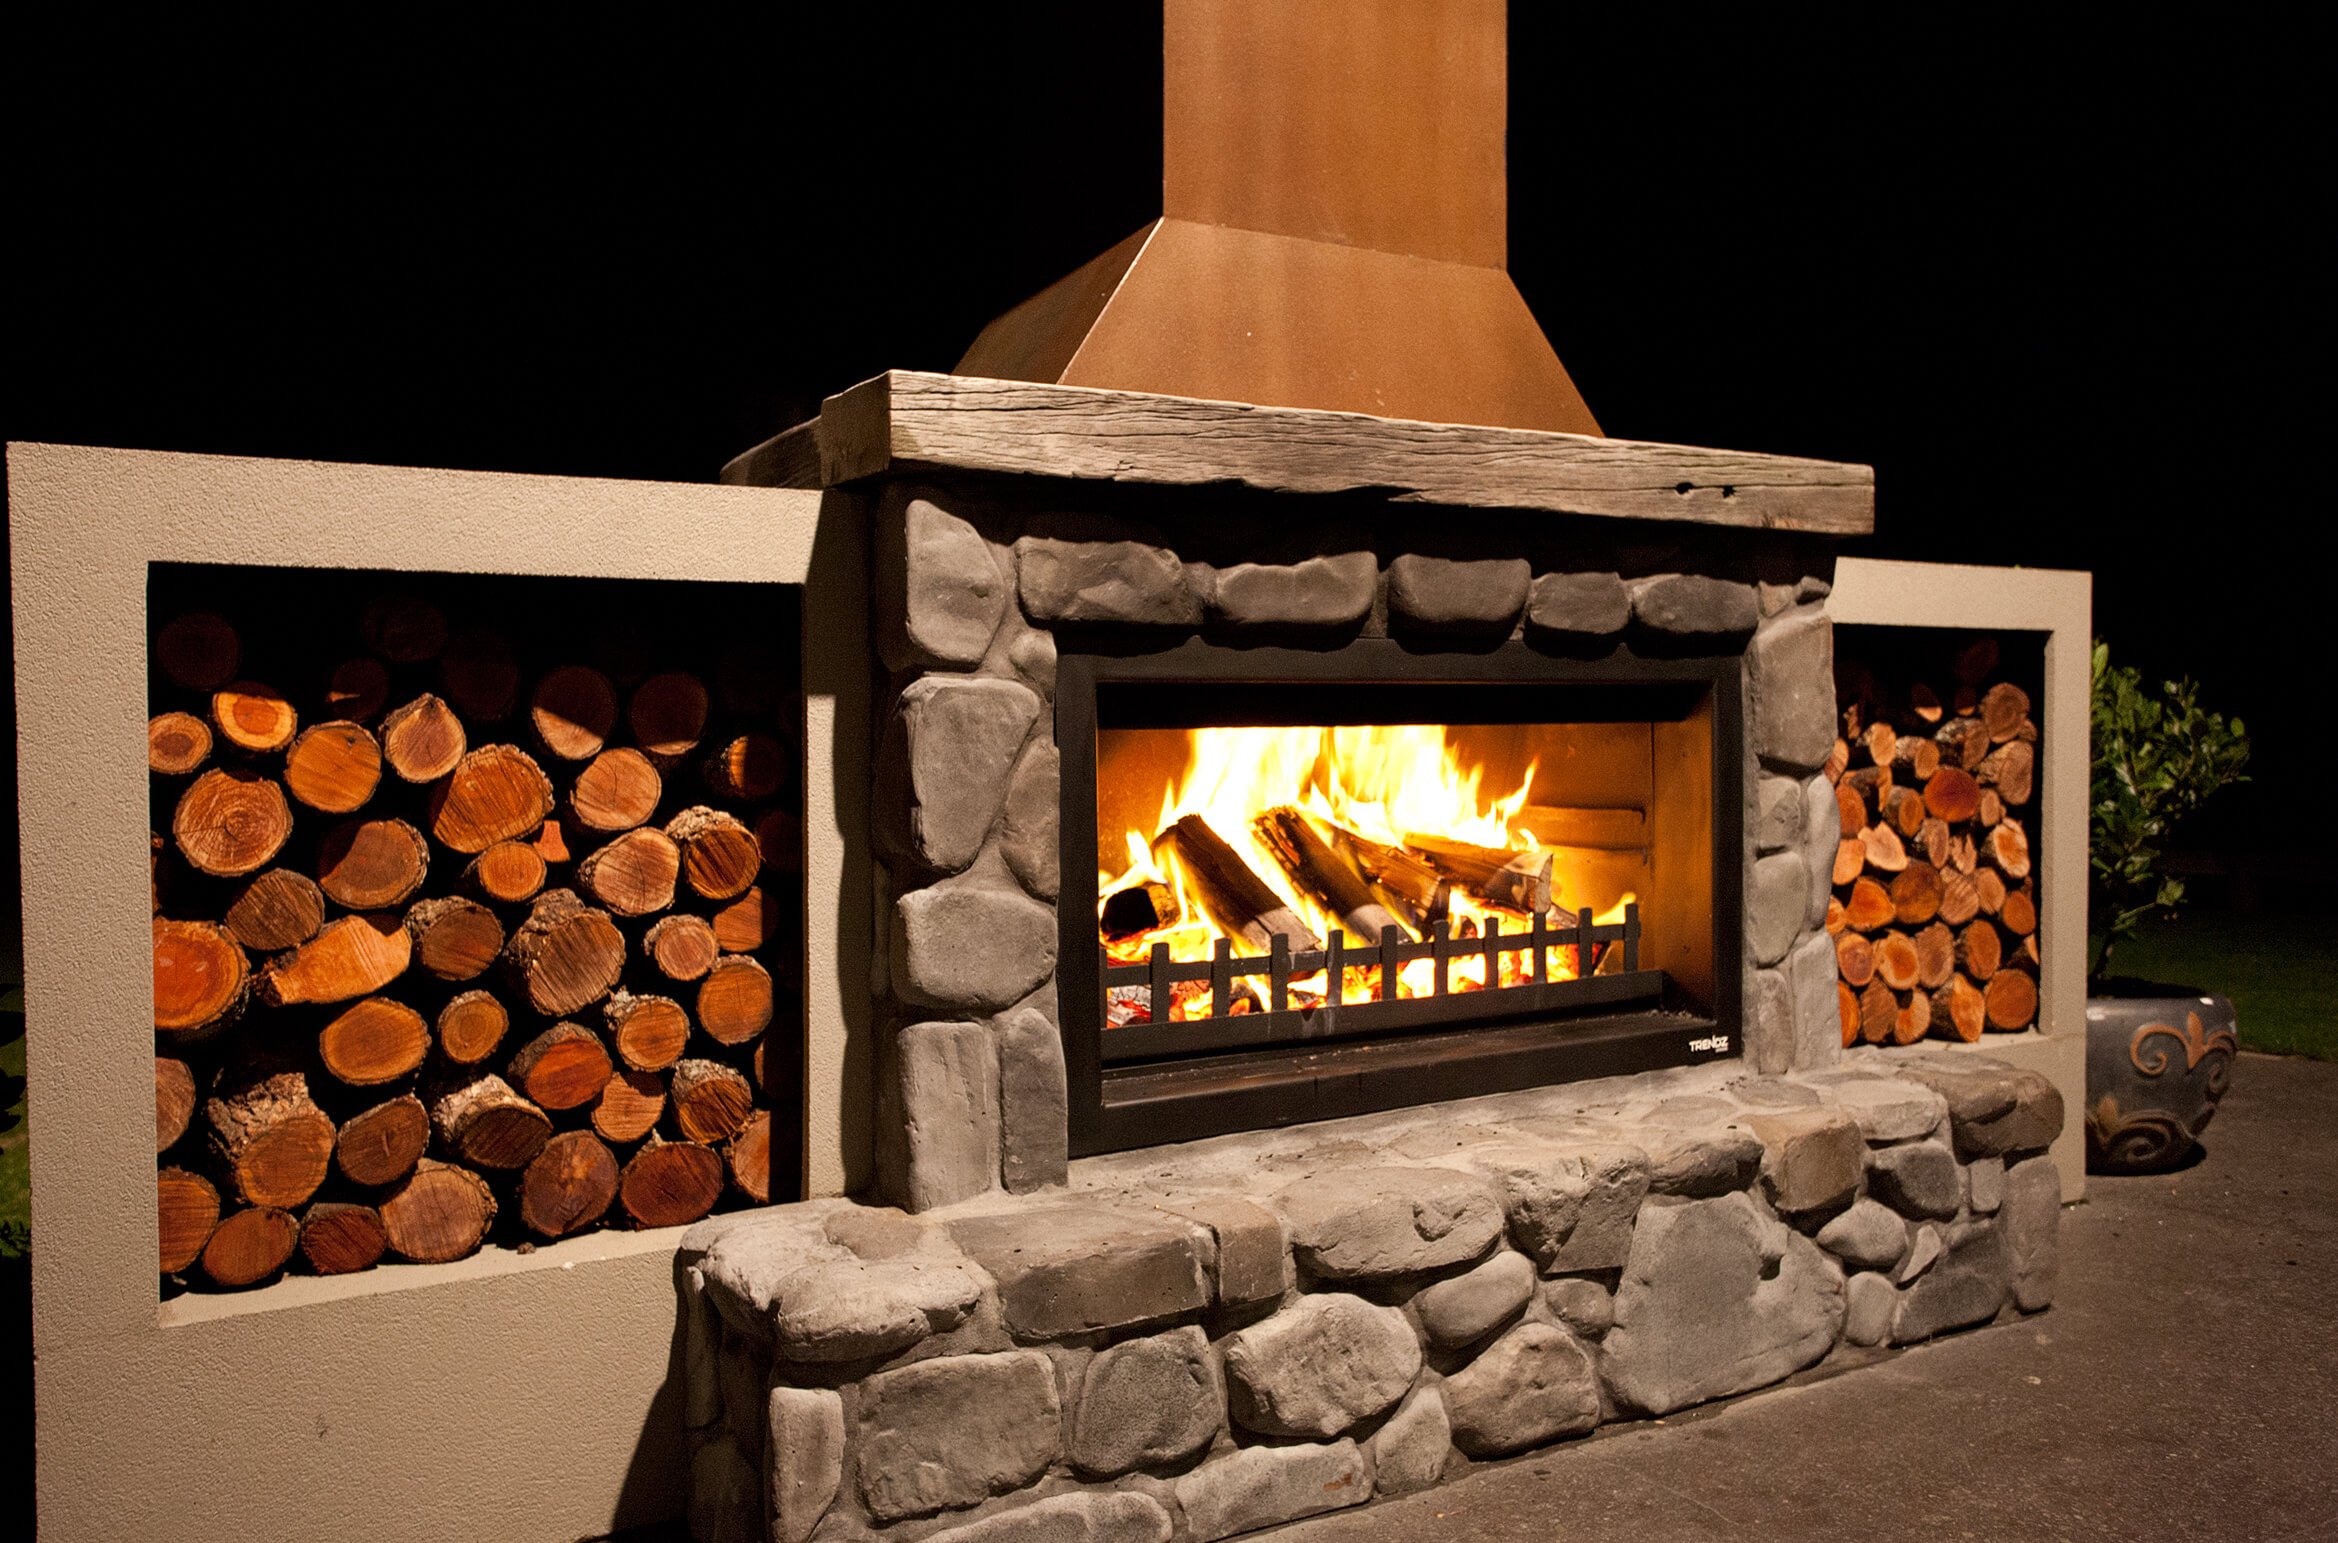 Built in wood boxes on fireplace